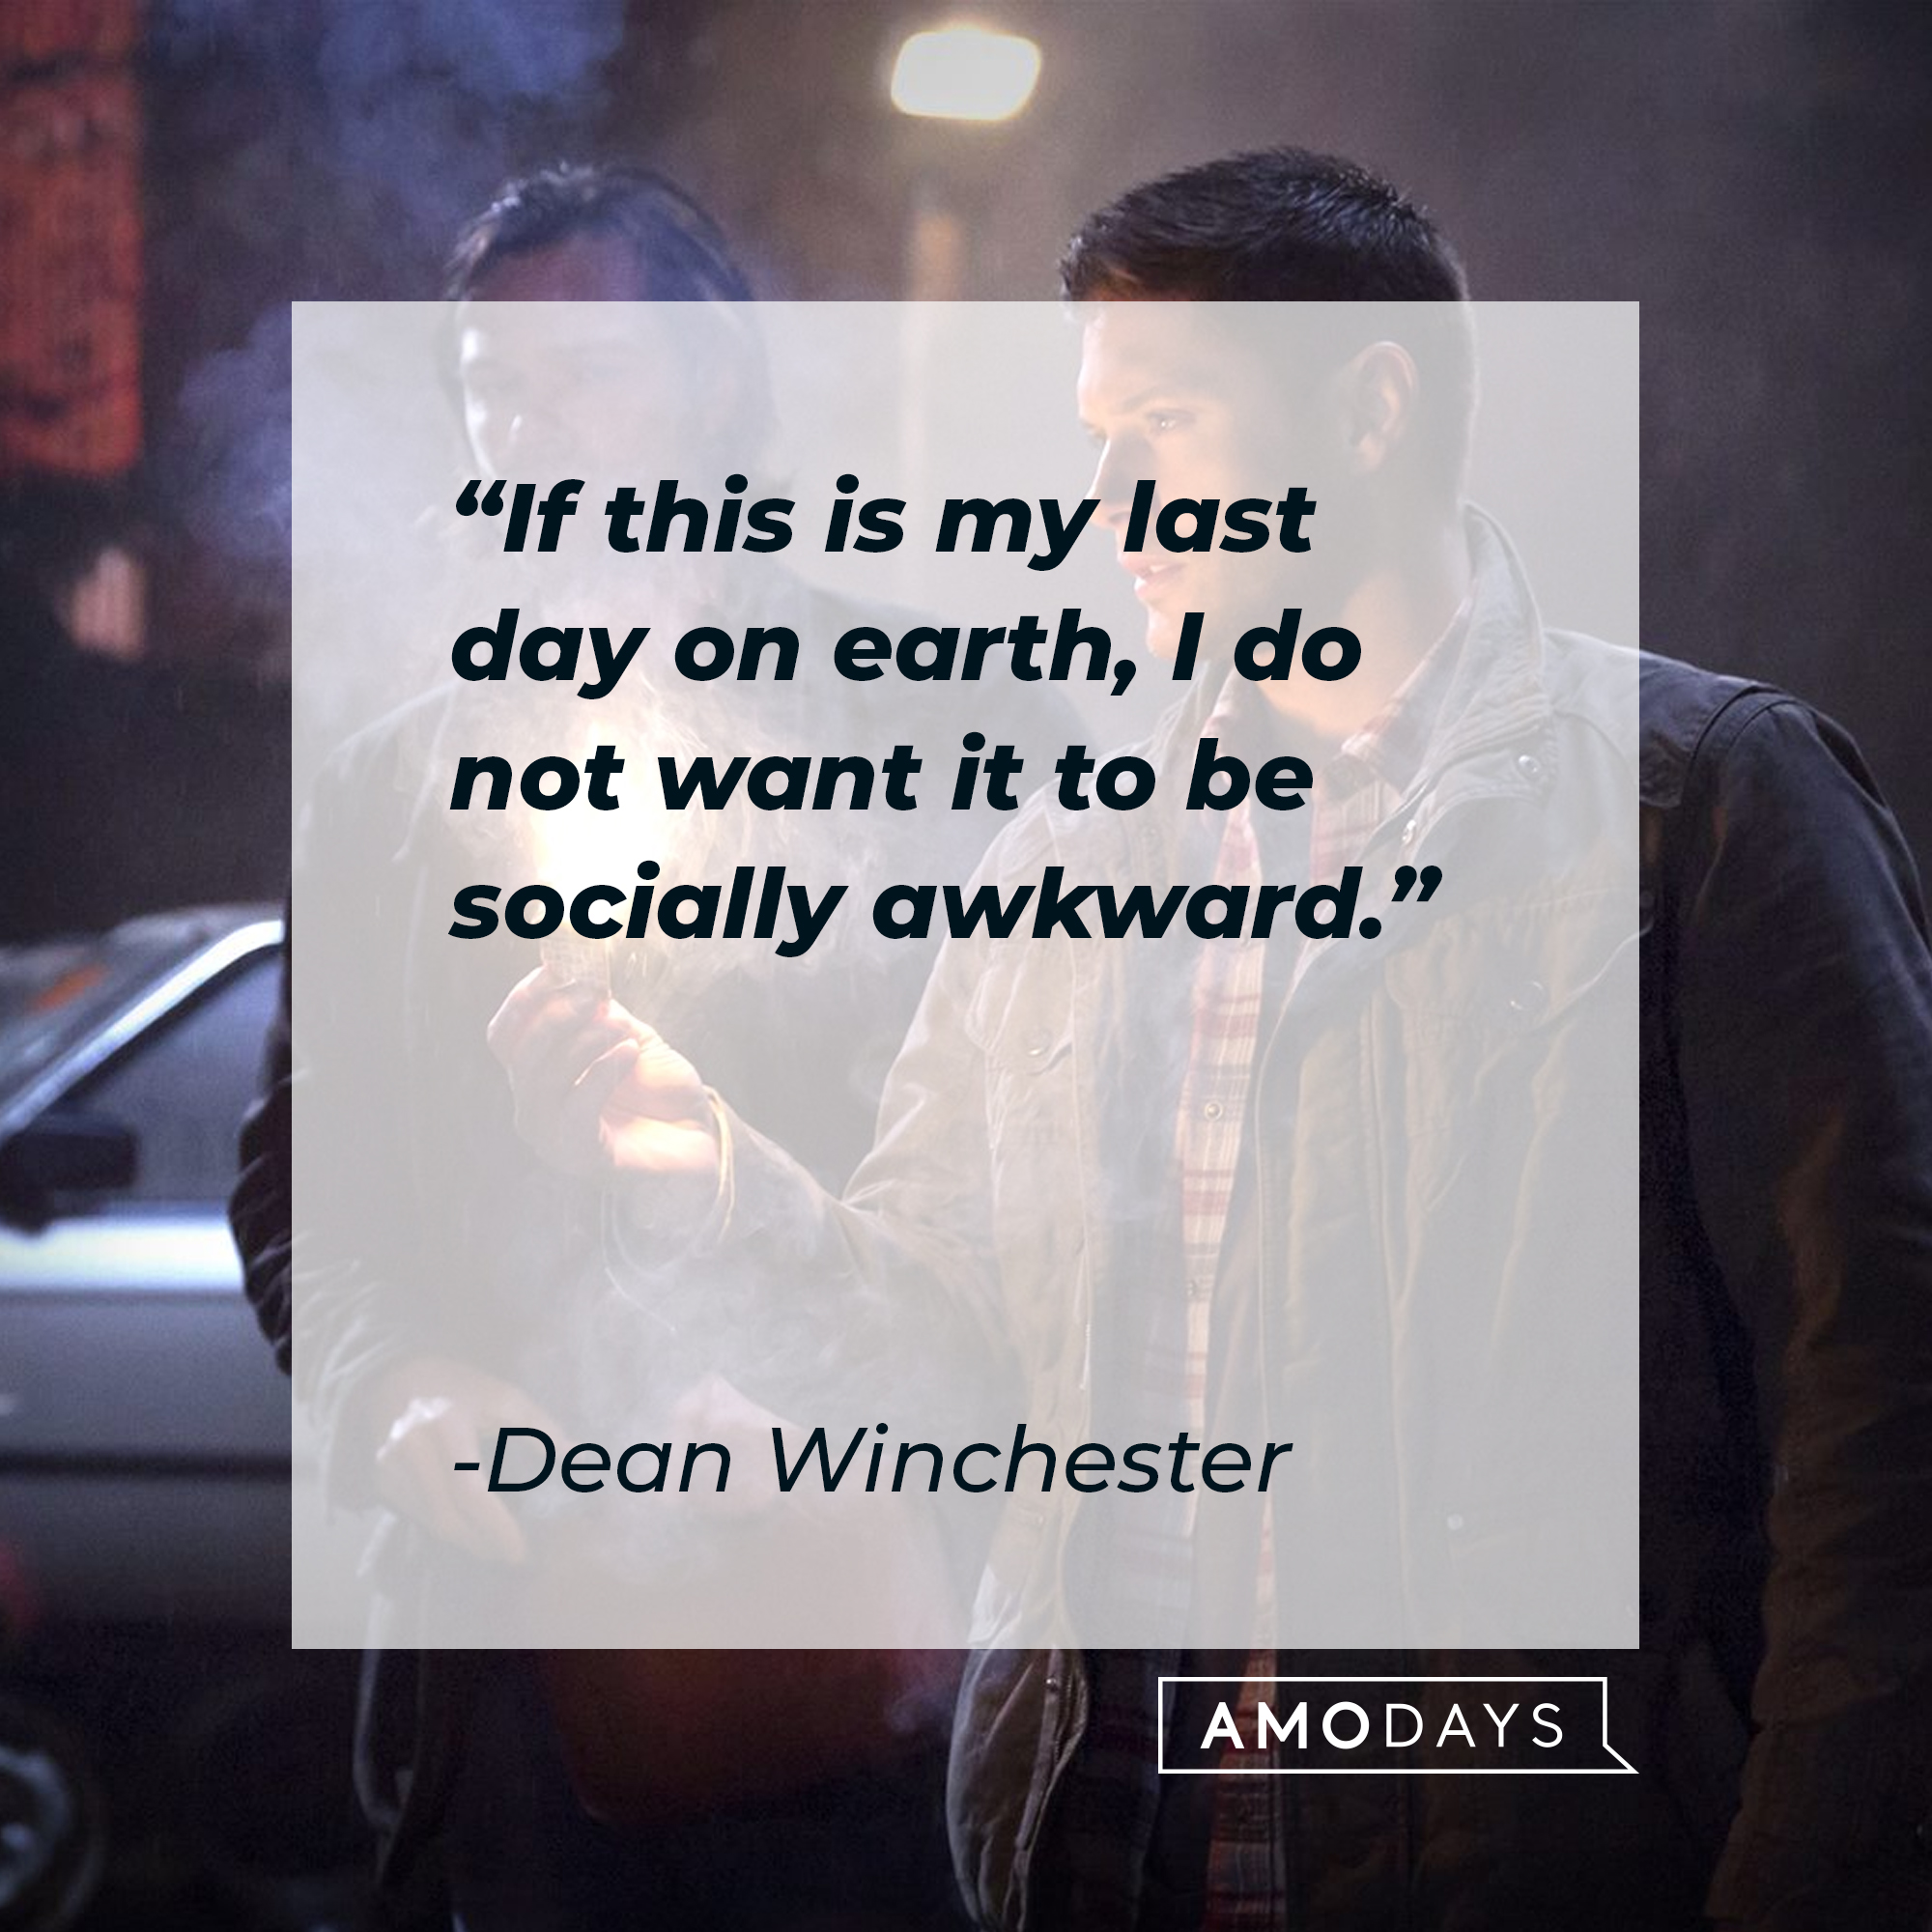 Sam and Dean Winchester, with Dean's quote: “If this is my last day on earth, I do not want it to be socially awkward.” | Source: Facebook.com/Supernatural